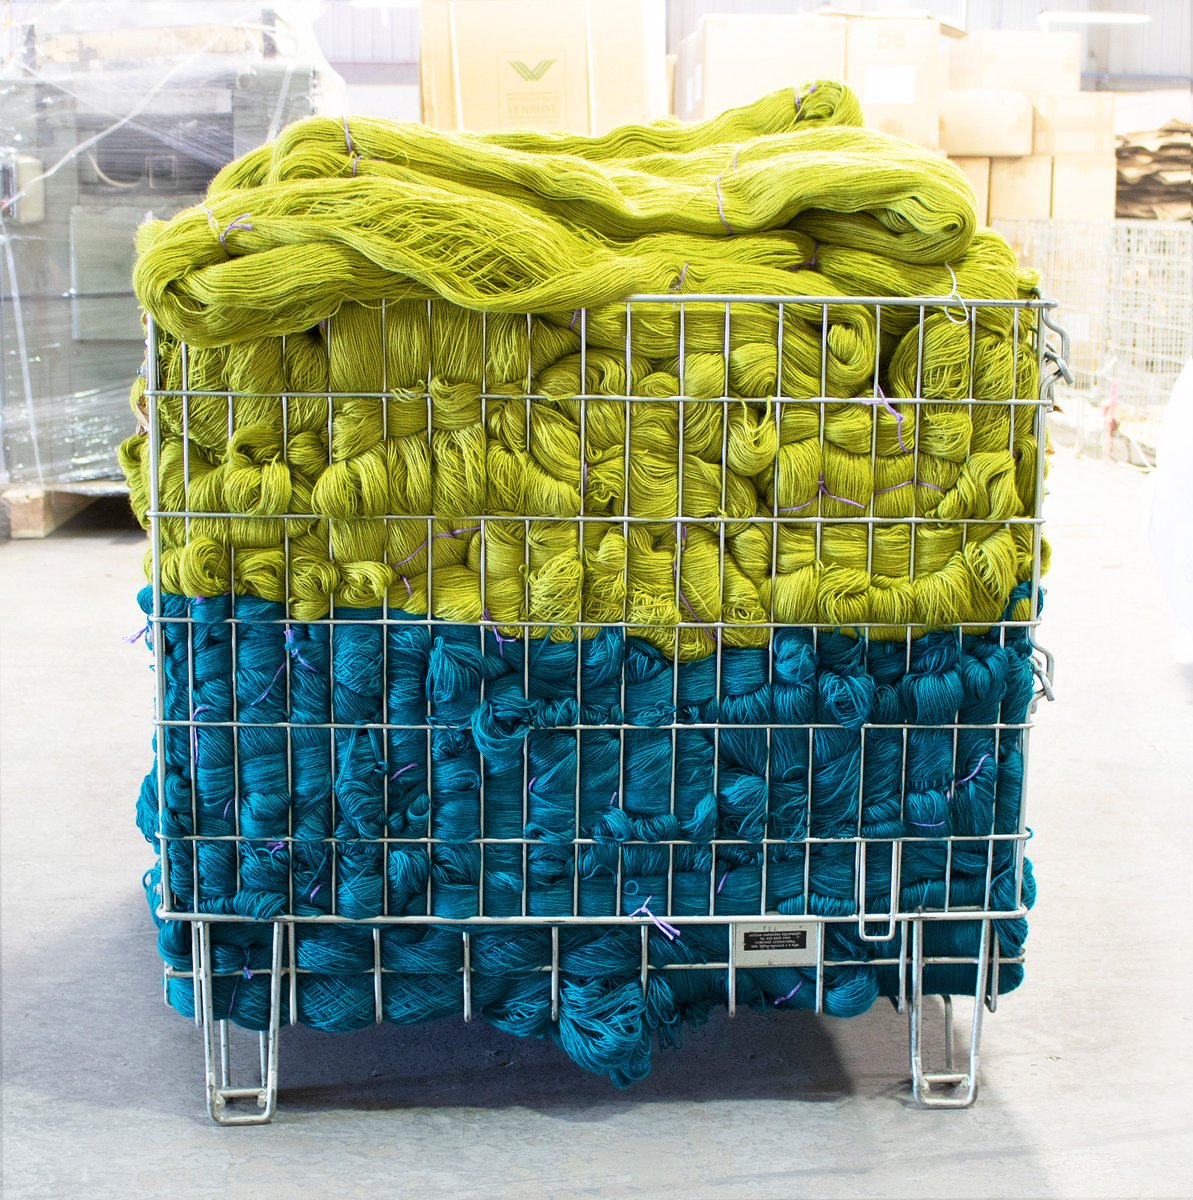 🏭 Factory Friday 🏭 Here is some colour inspiration to brighten up your day, ready for the weekend ☀️

#factoryfriday #colourinspo #summerknits #wip #knitting #crochet #yarn #wool #britishwool #colourful #summer #yarninspiration #wyspinners #knit #knitter